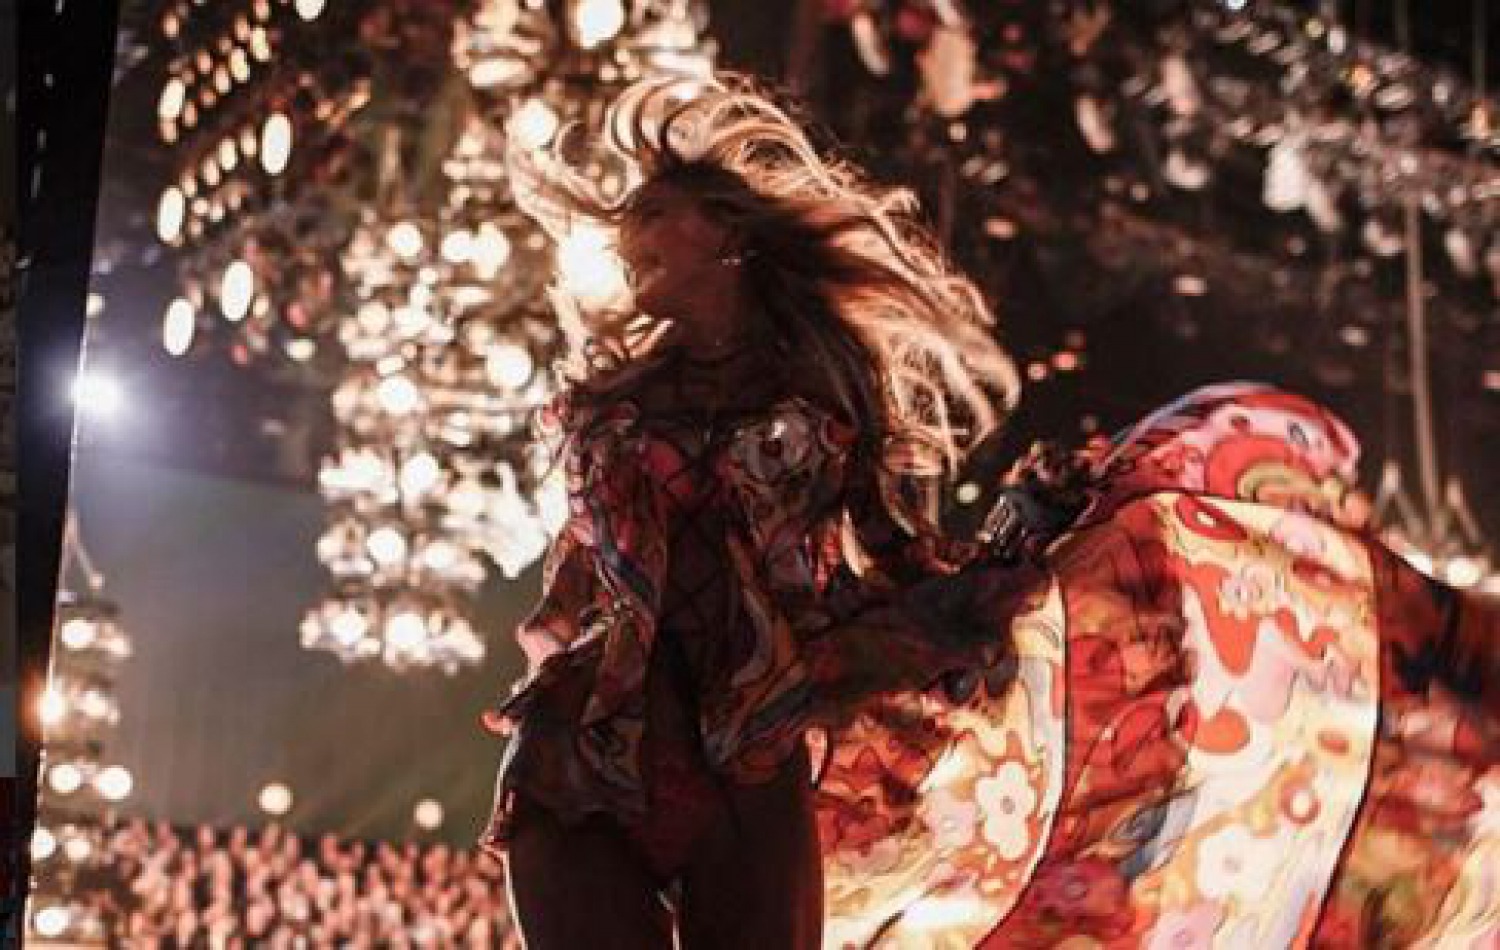 Beautiful bedhead, or just messy? Victoria's Secret 2015 catwalk laid bare